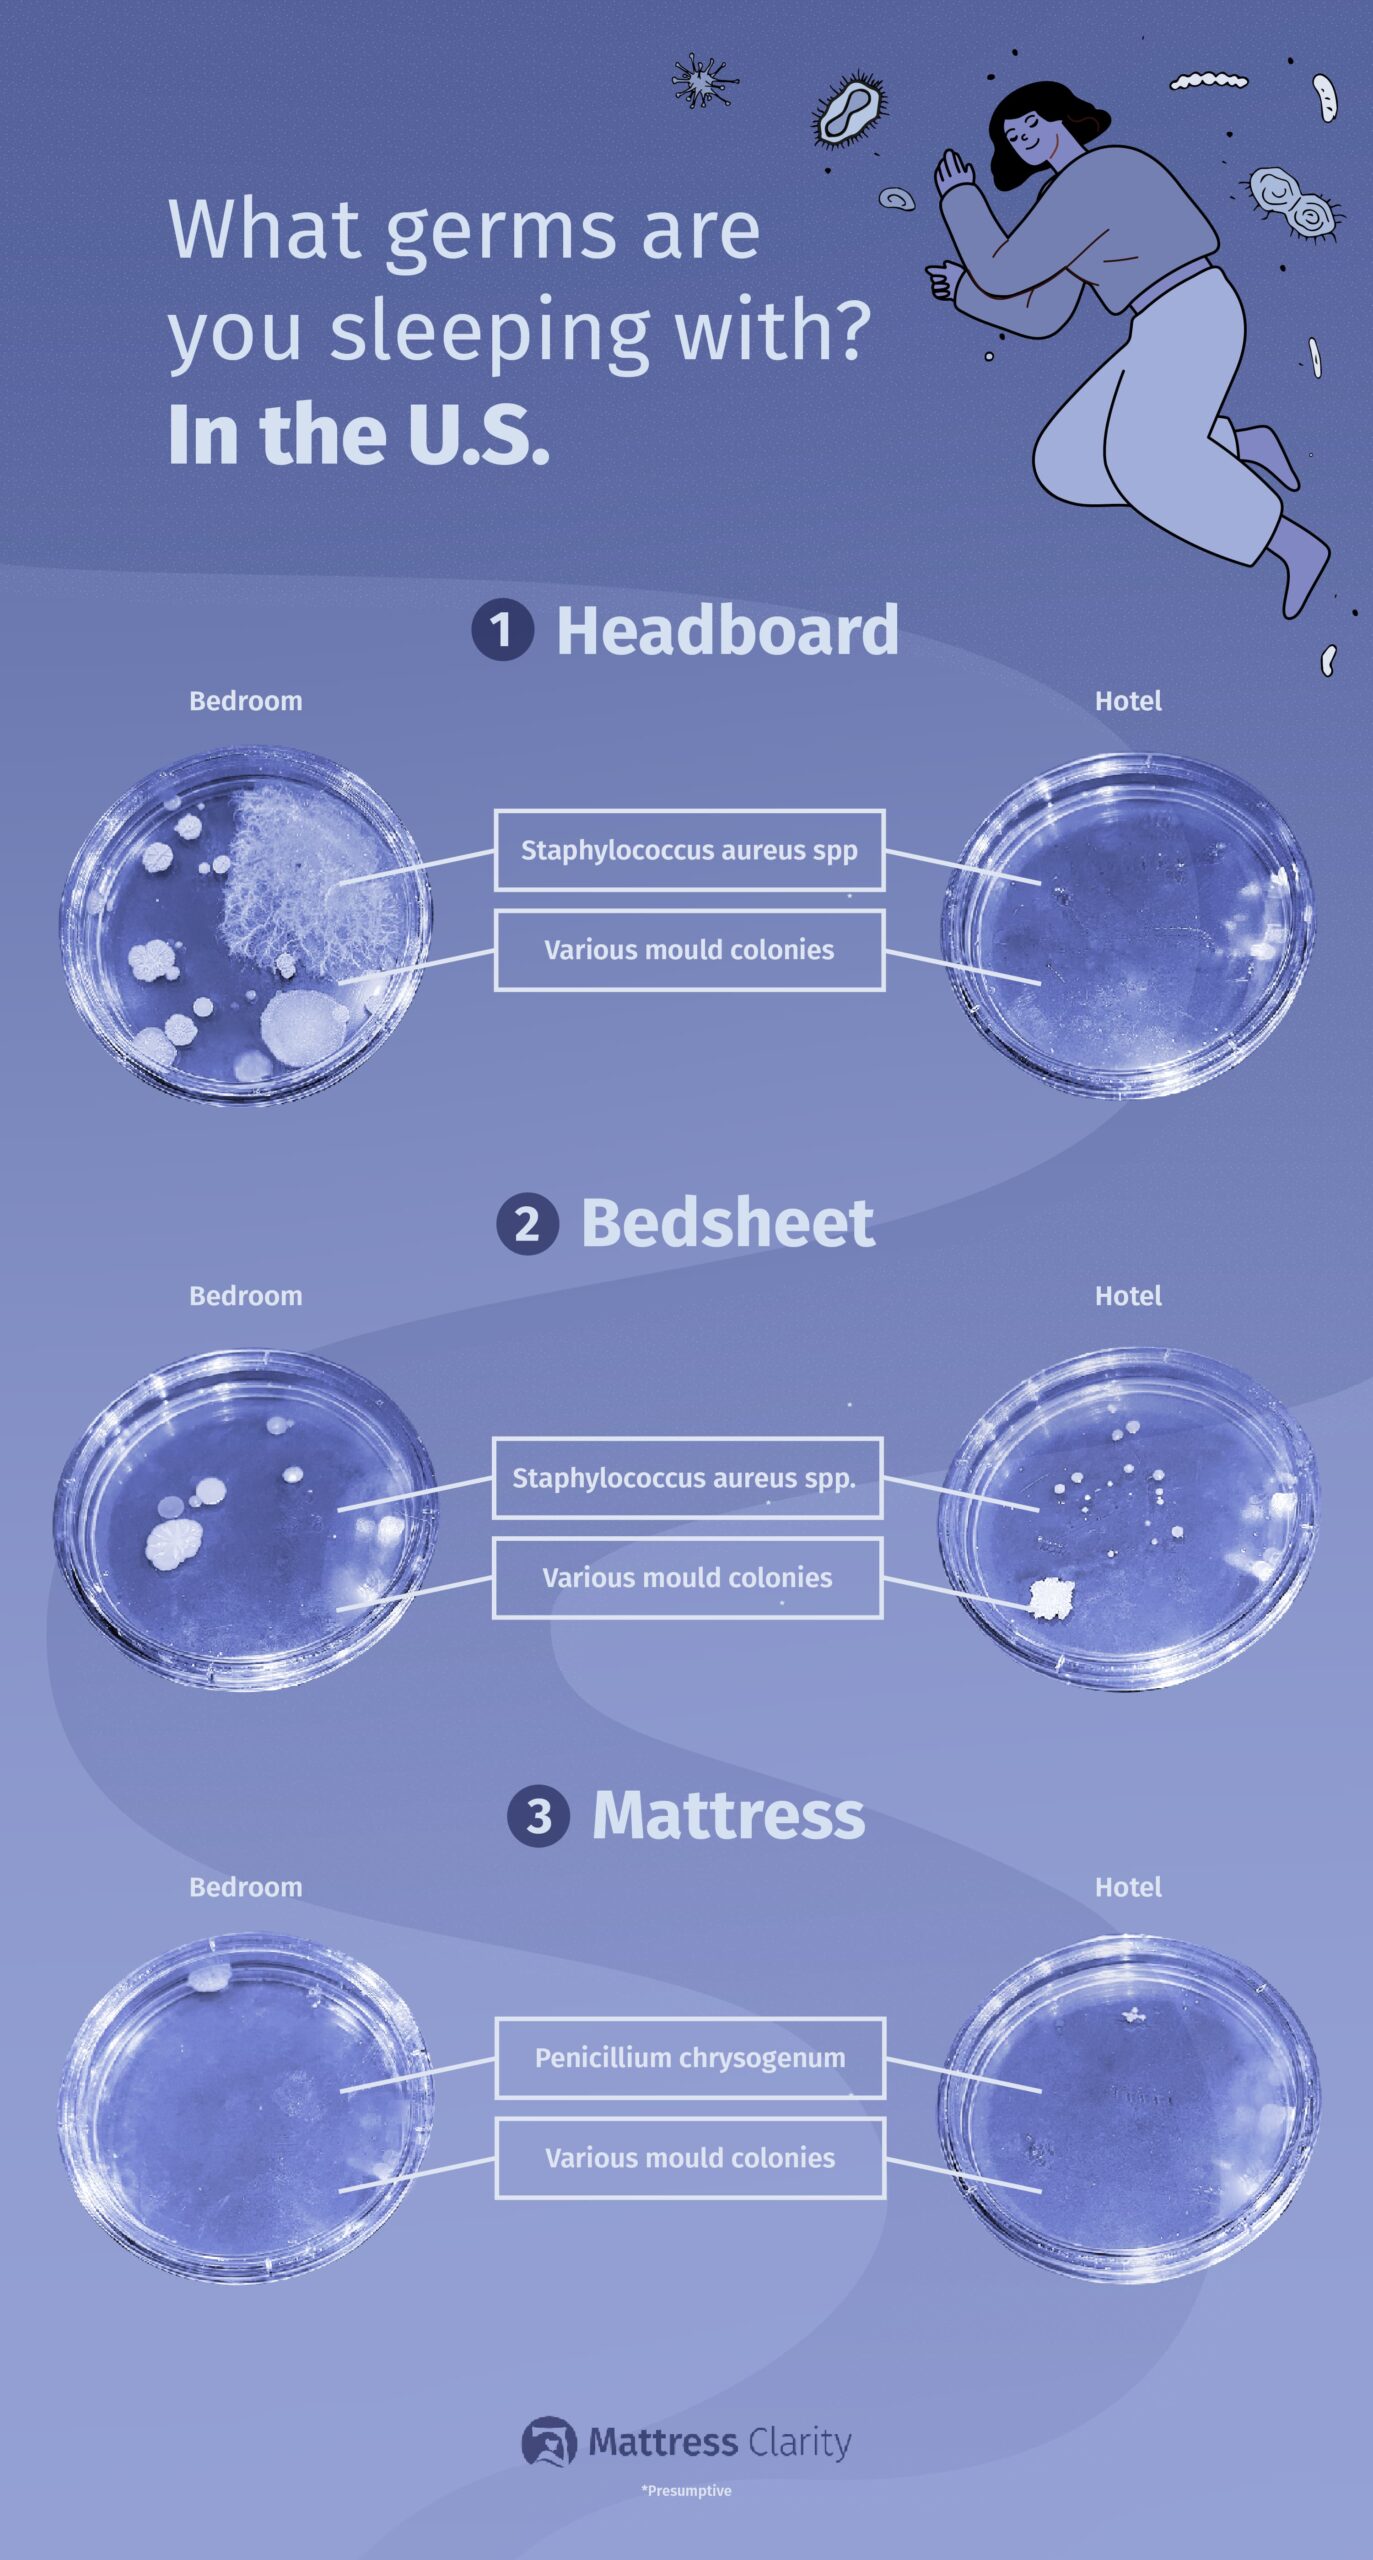 Image showing Petri dishes with bacteria on them that shows how dirty the U.S. sleeping spaces are.